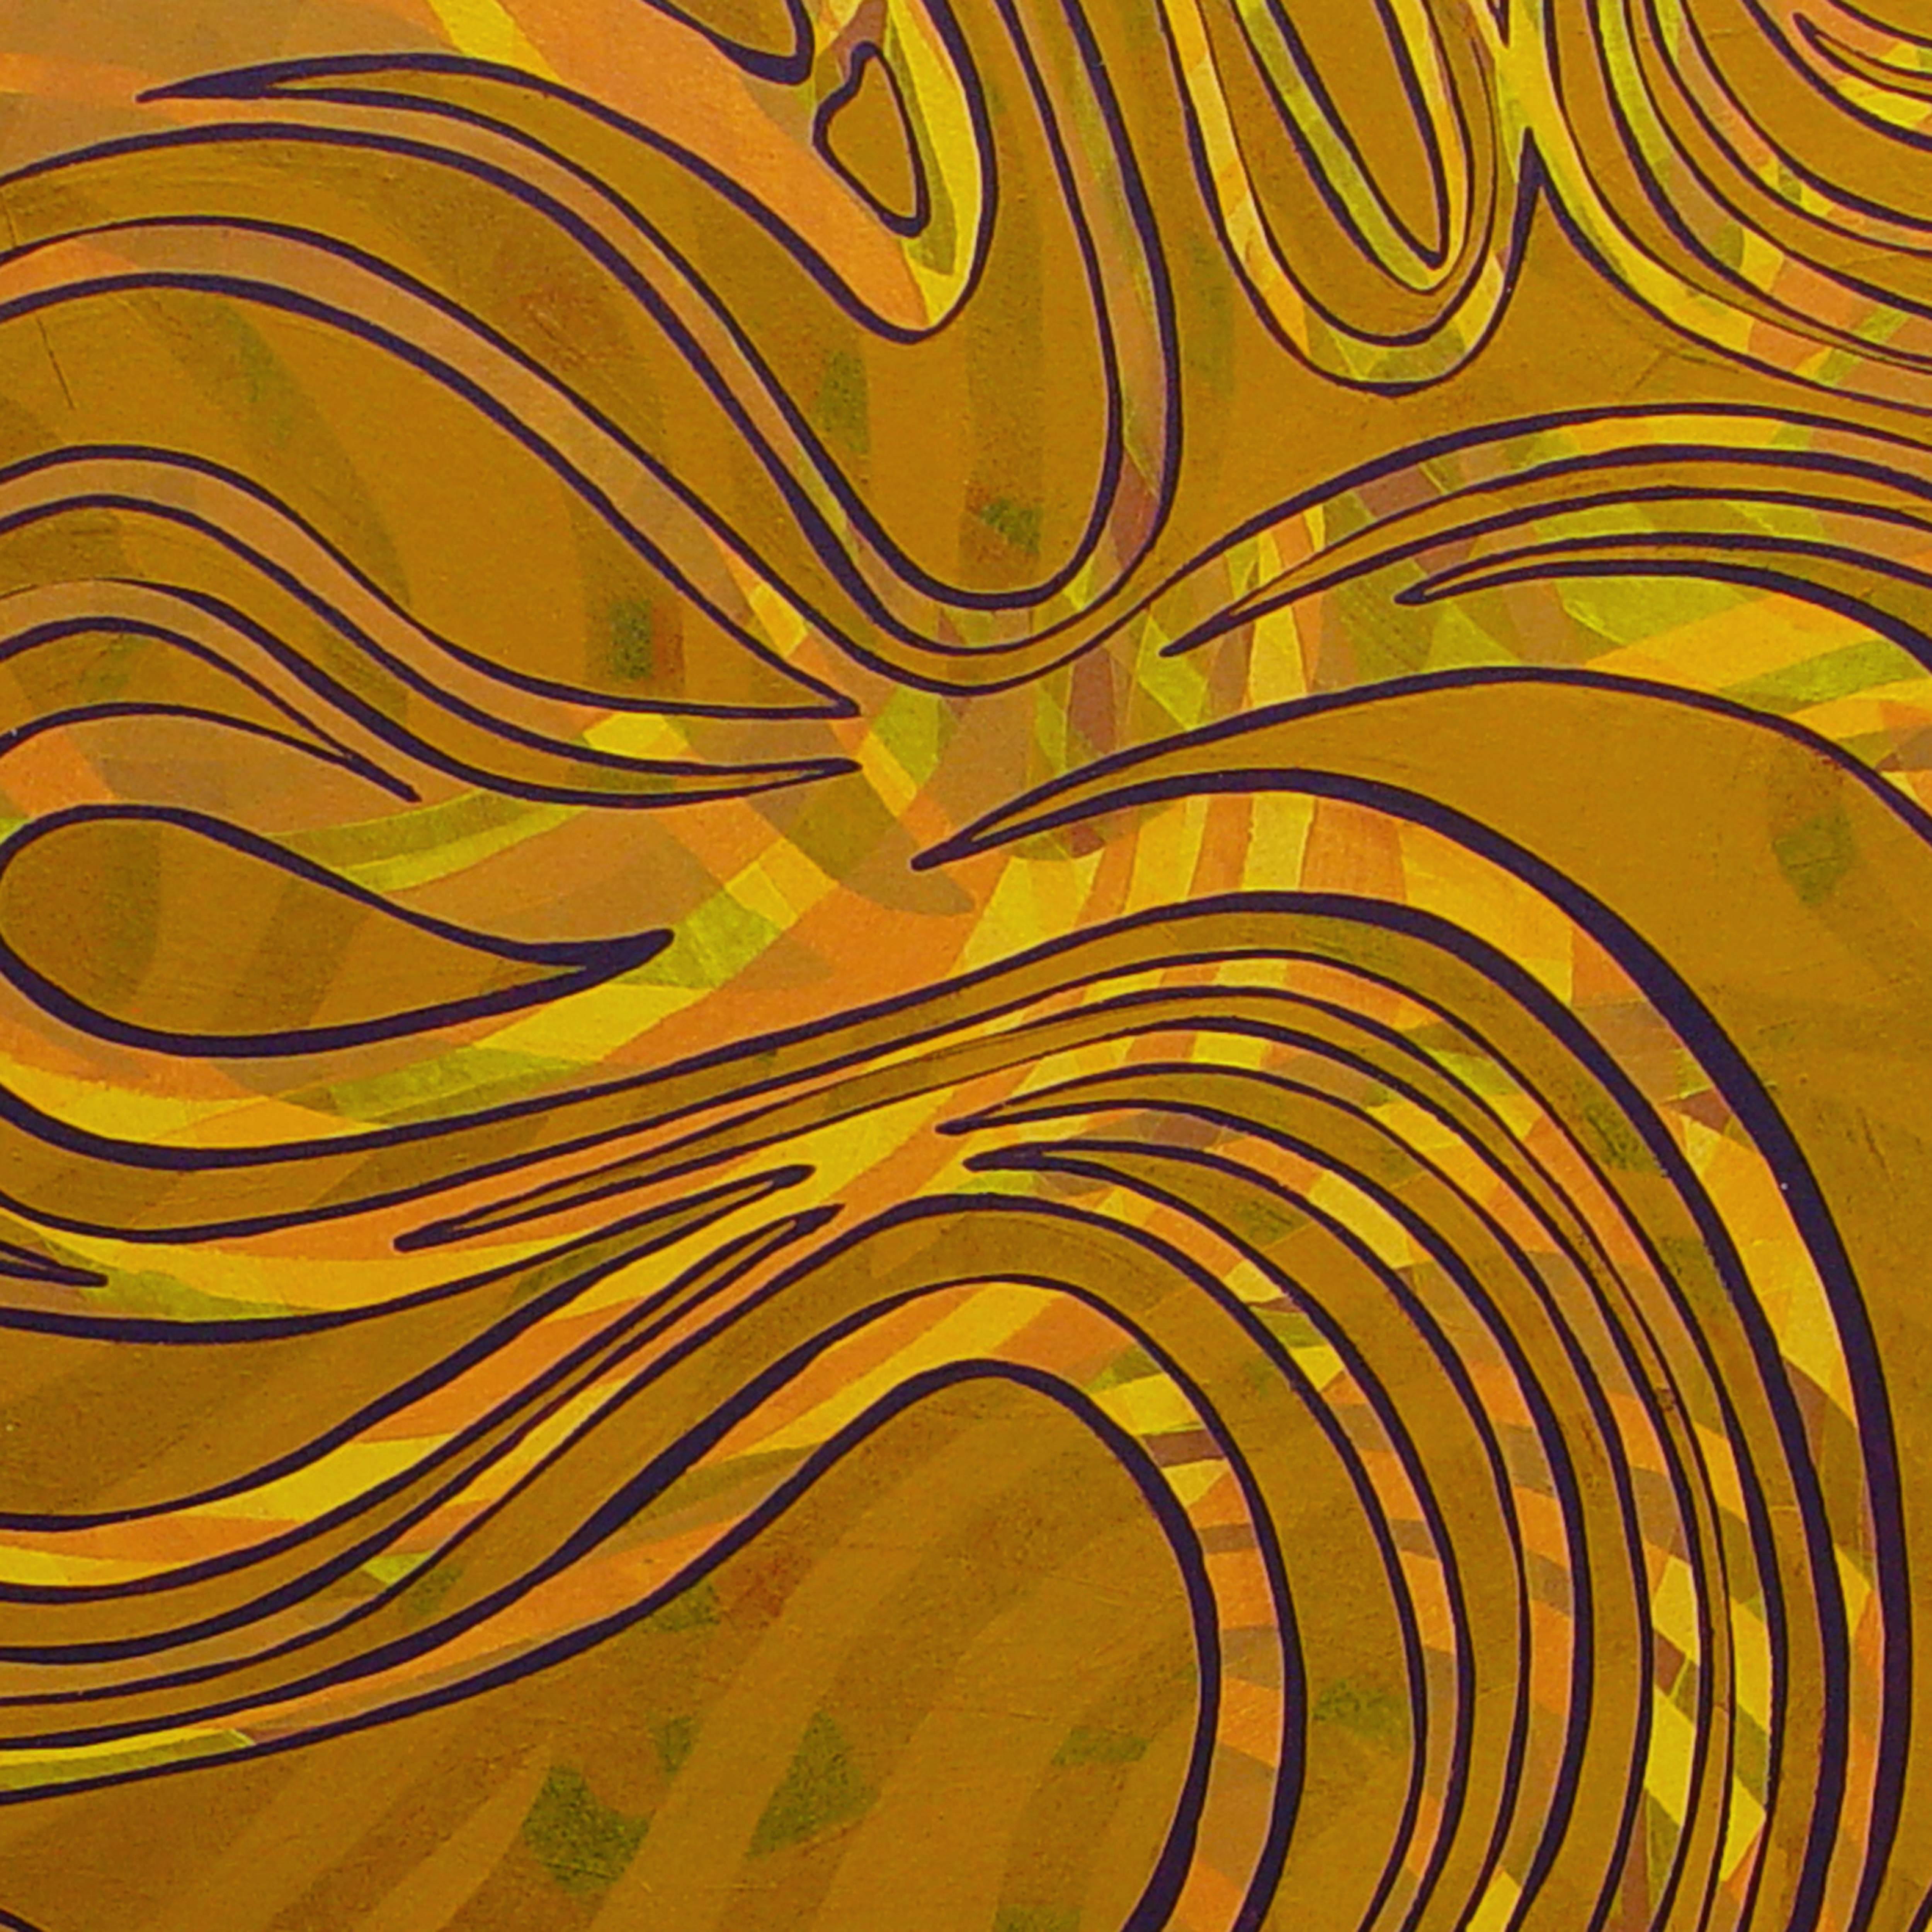 Abstract, pattern, modern, swirls, lines, layers, hypnotic, yellow, ochre, gold, Joseph Albers, Sol LeWitt, pattern, contemporary, colorful, bright, interior design, gold, golden, interior decor

BIOGRAPHY
Roger Mudre’s work is all about the circle.